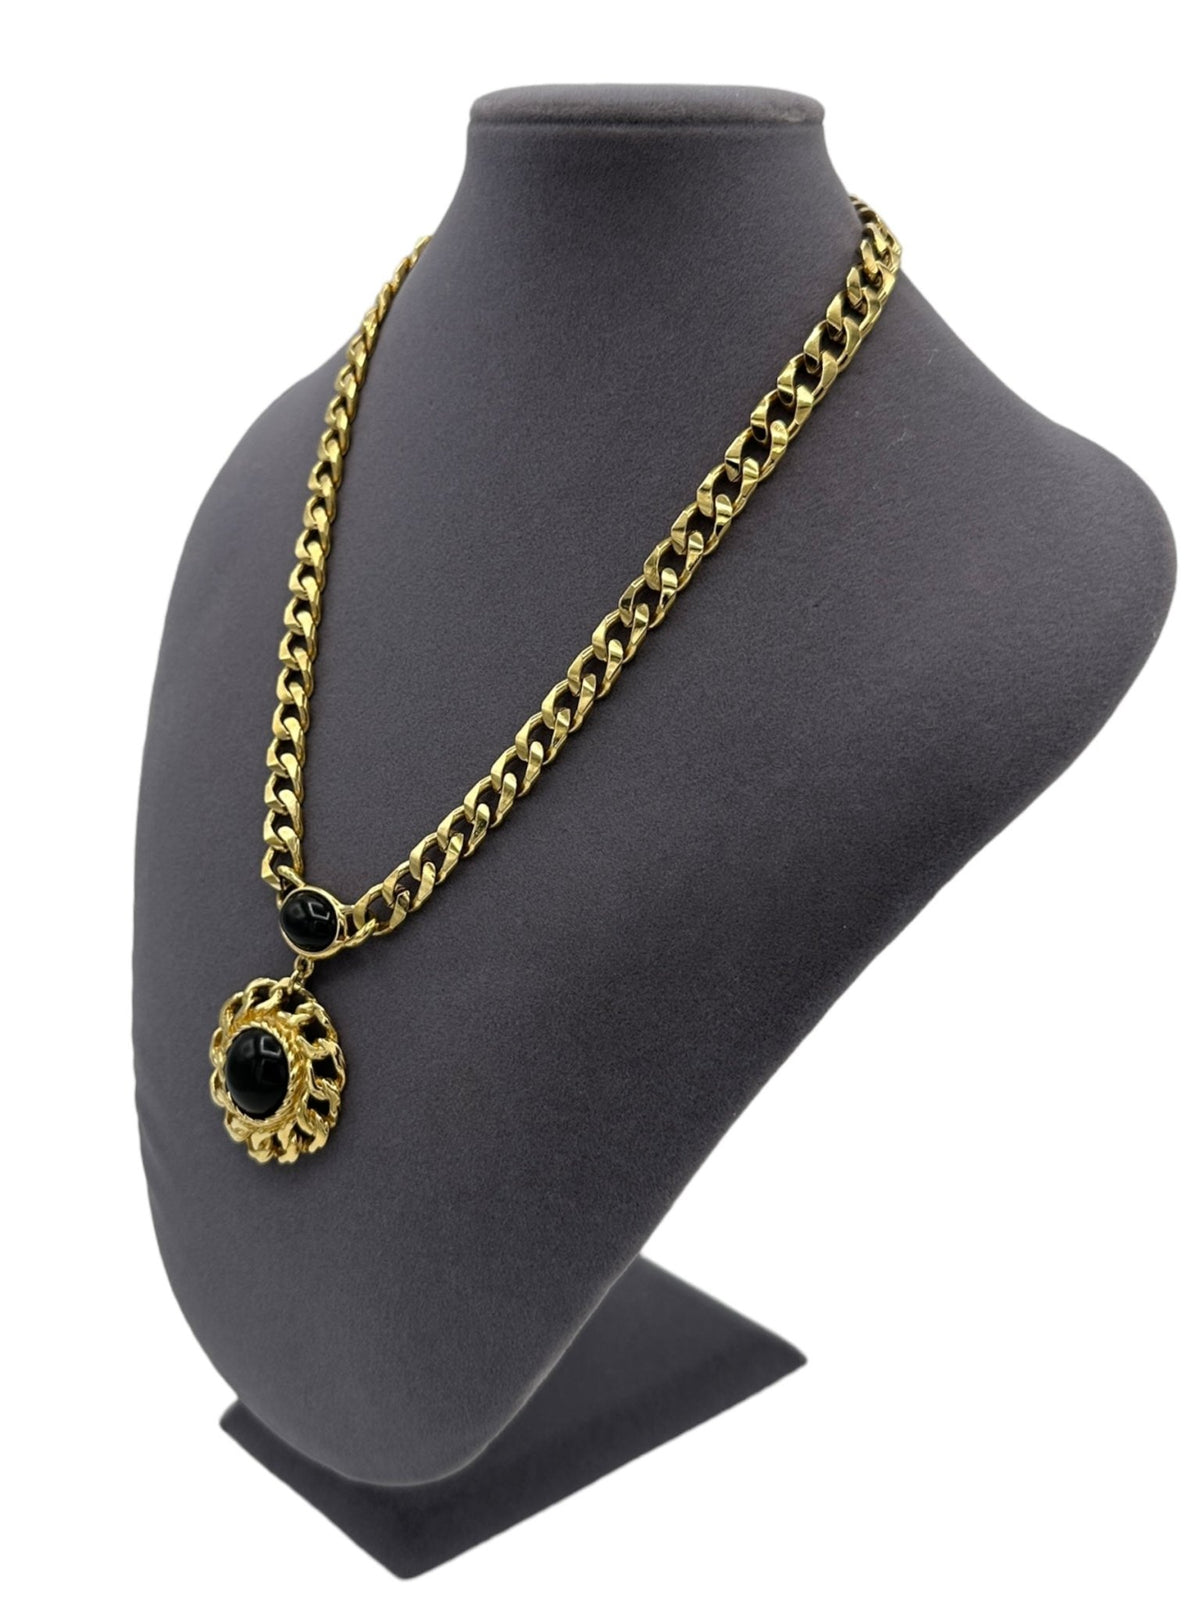 Trifari Jewelry Gold Curb Chain Necklace Classic Black Cabochon Pendant - 24 Wishes Vintage Jewelry